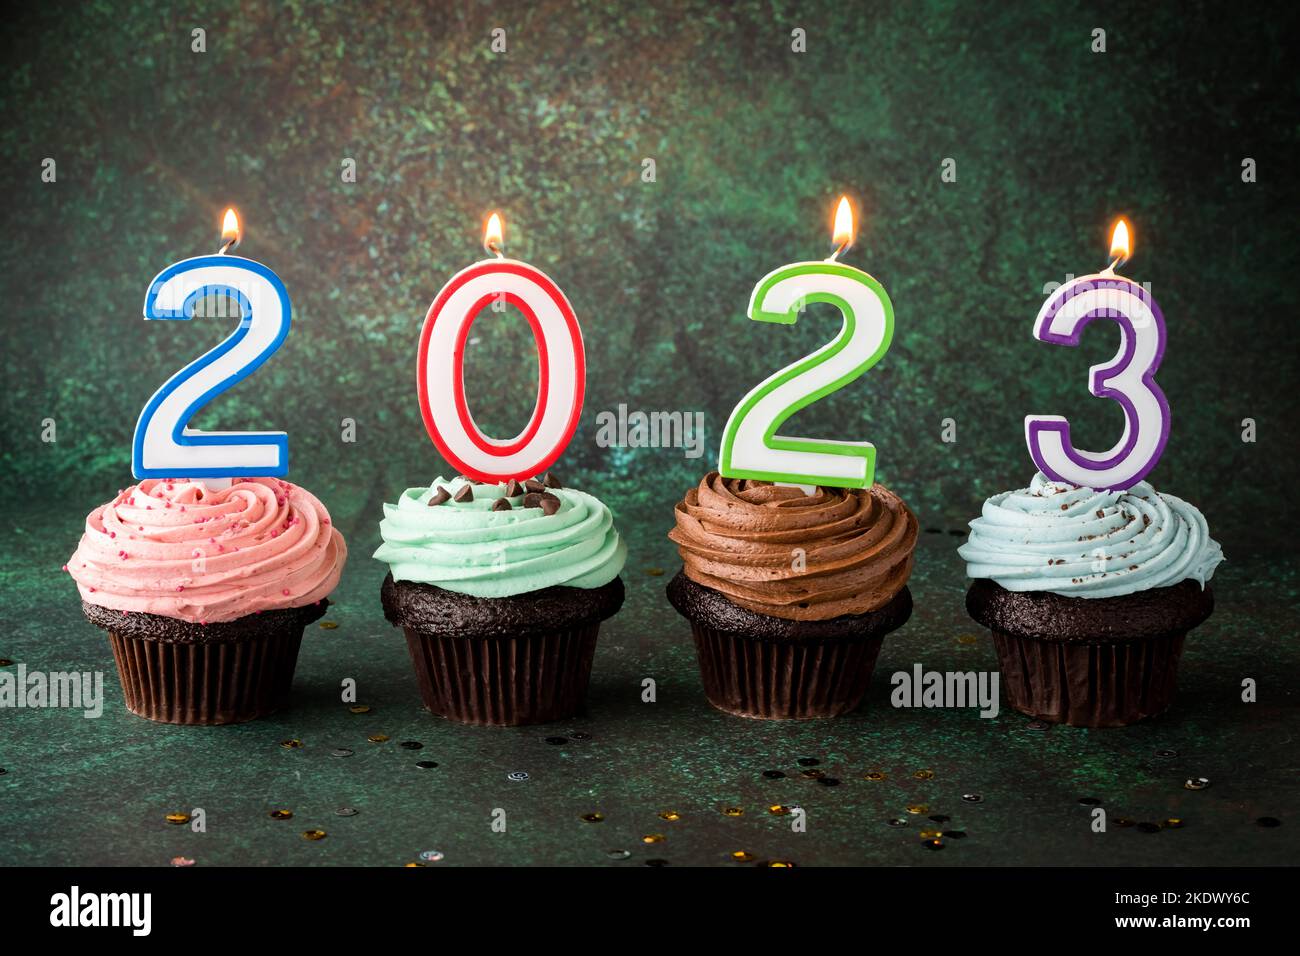 Large buttercream frosted cupcakes with lit number candles for the New Year. Stock Photo